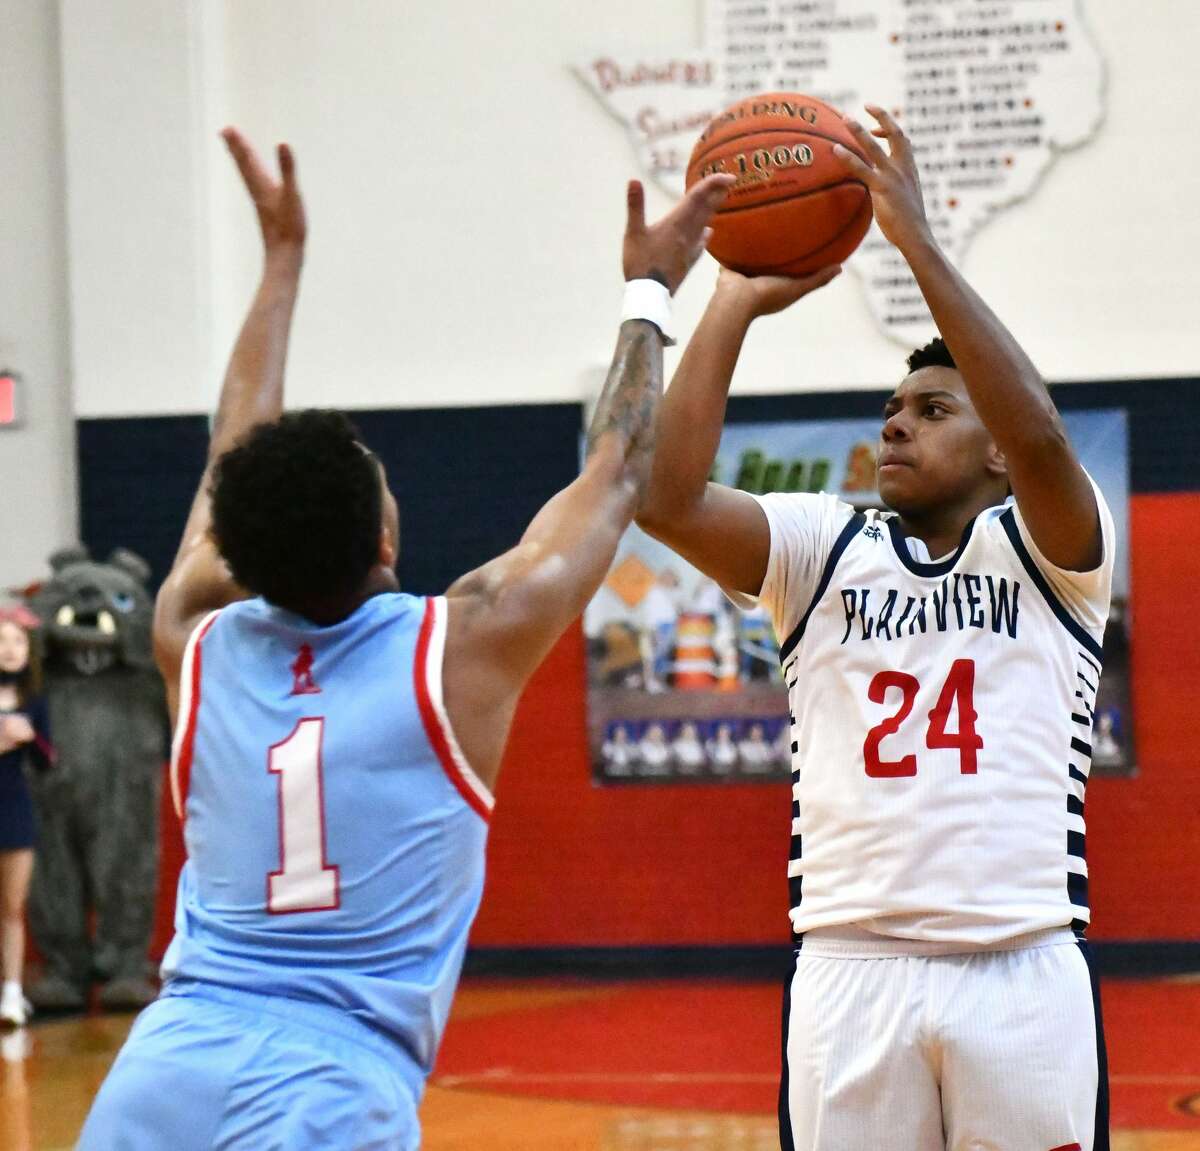 The Plainview boys basketball team hosted Lubbock Monterey in a non-district tilt on Tuesday, Nov. 24, 2020 in the Dog House and Plainview High School.